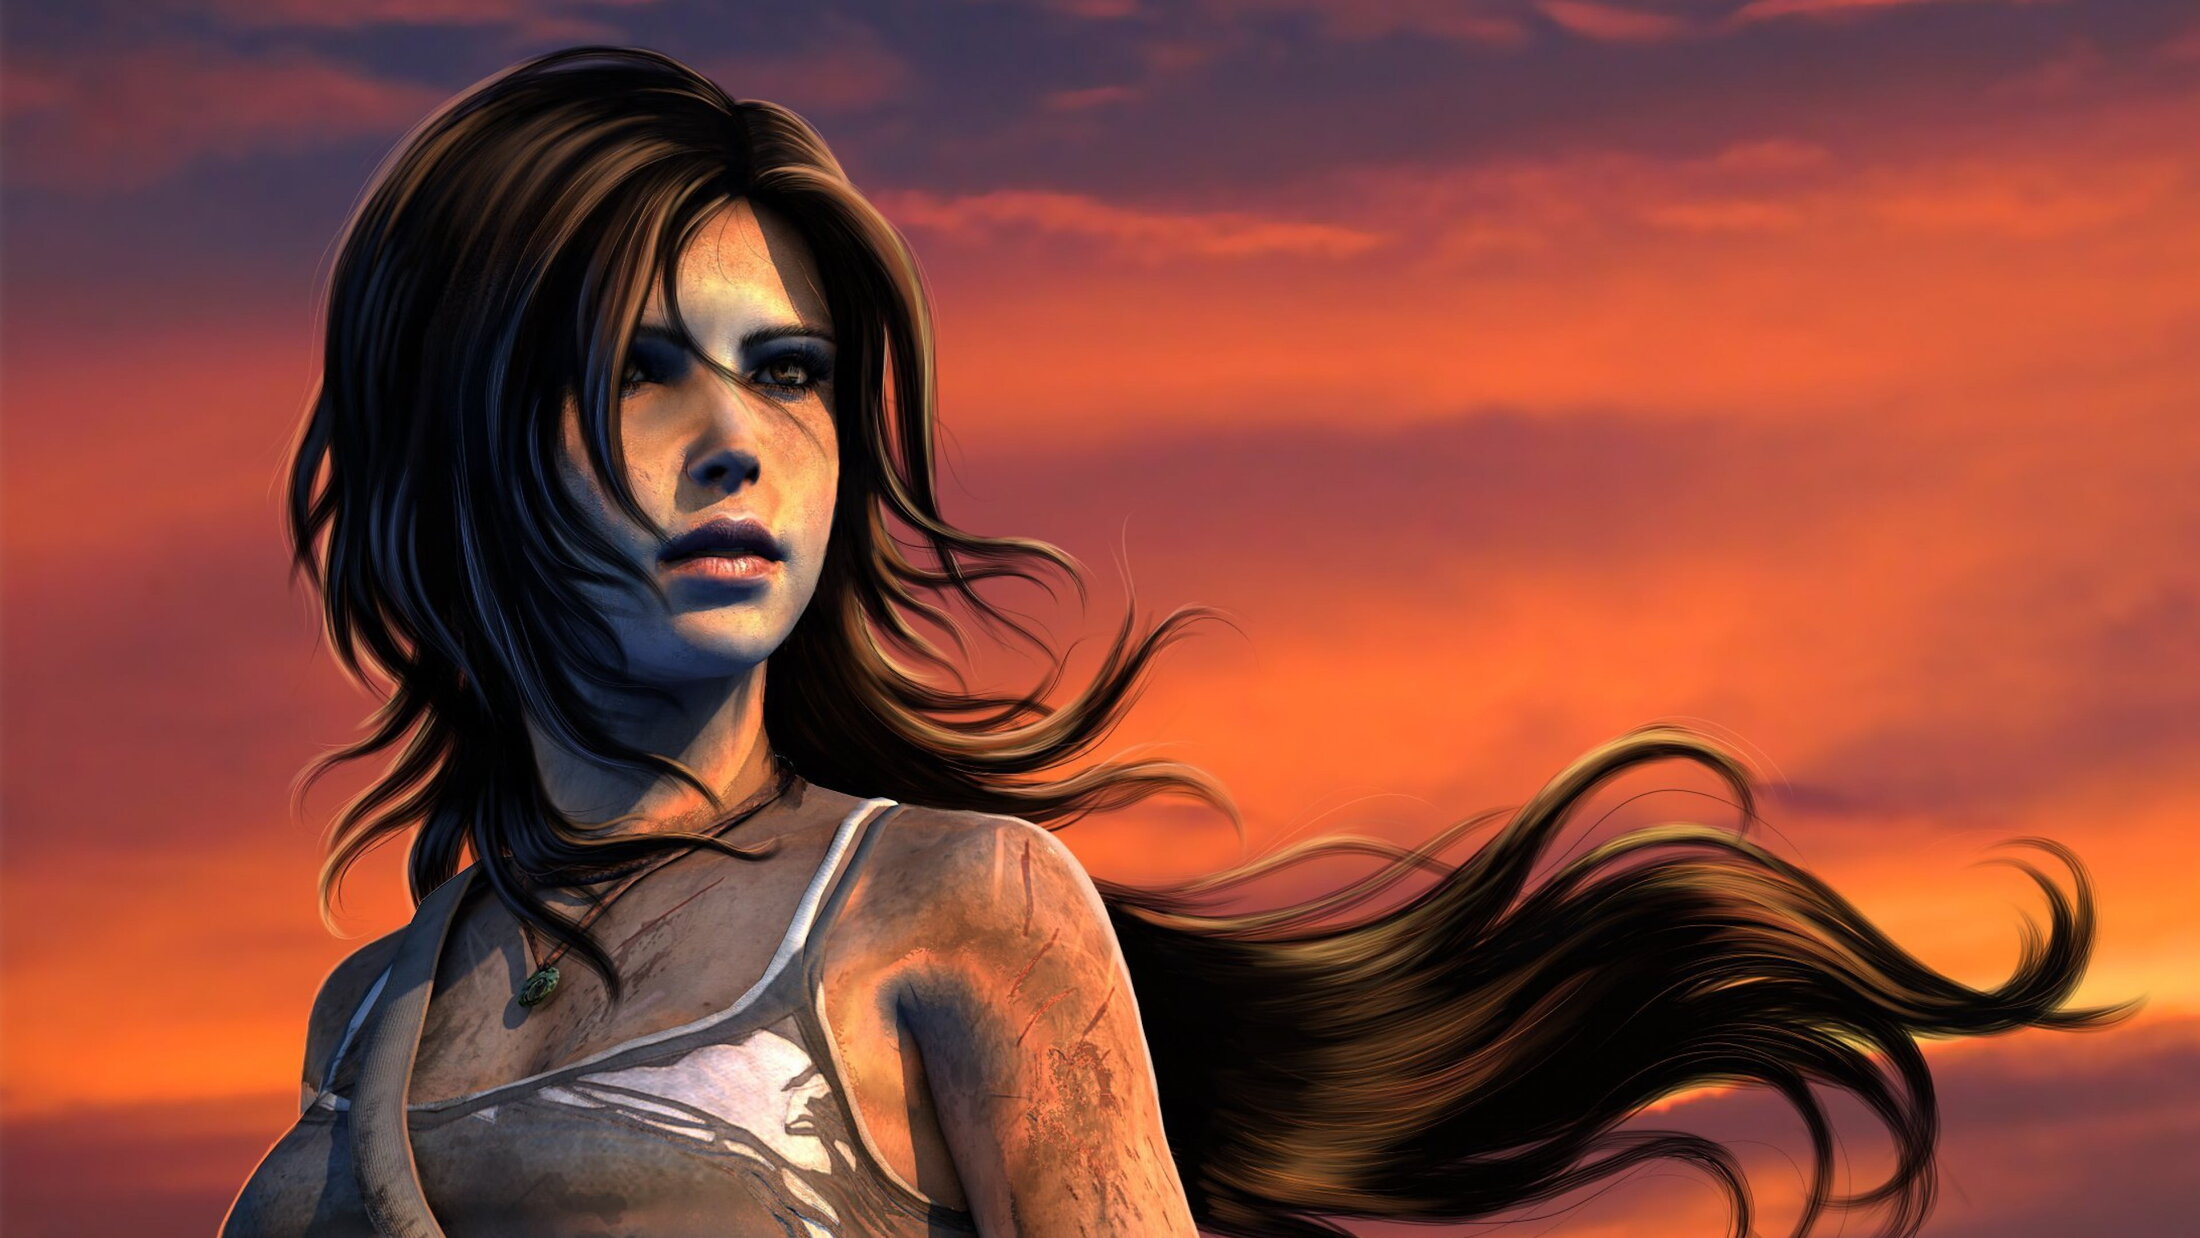 Tomb Raider becomes the latest games IP to come to Netflix as anime   Pocket Gamerbiz  PGbiz